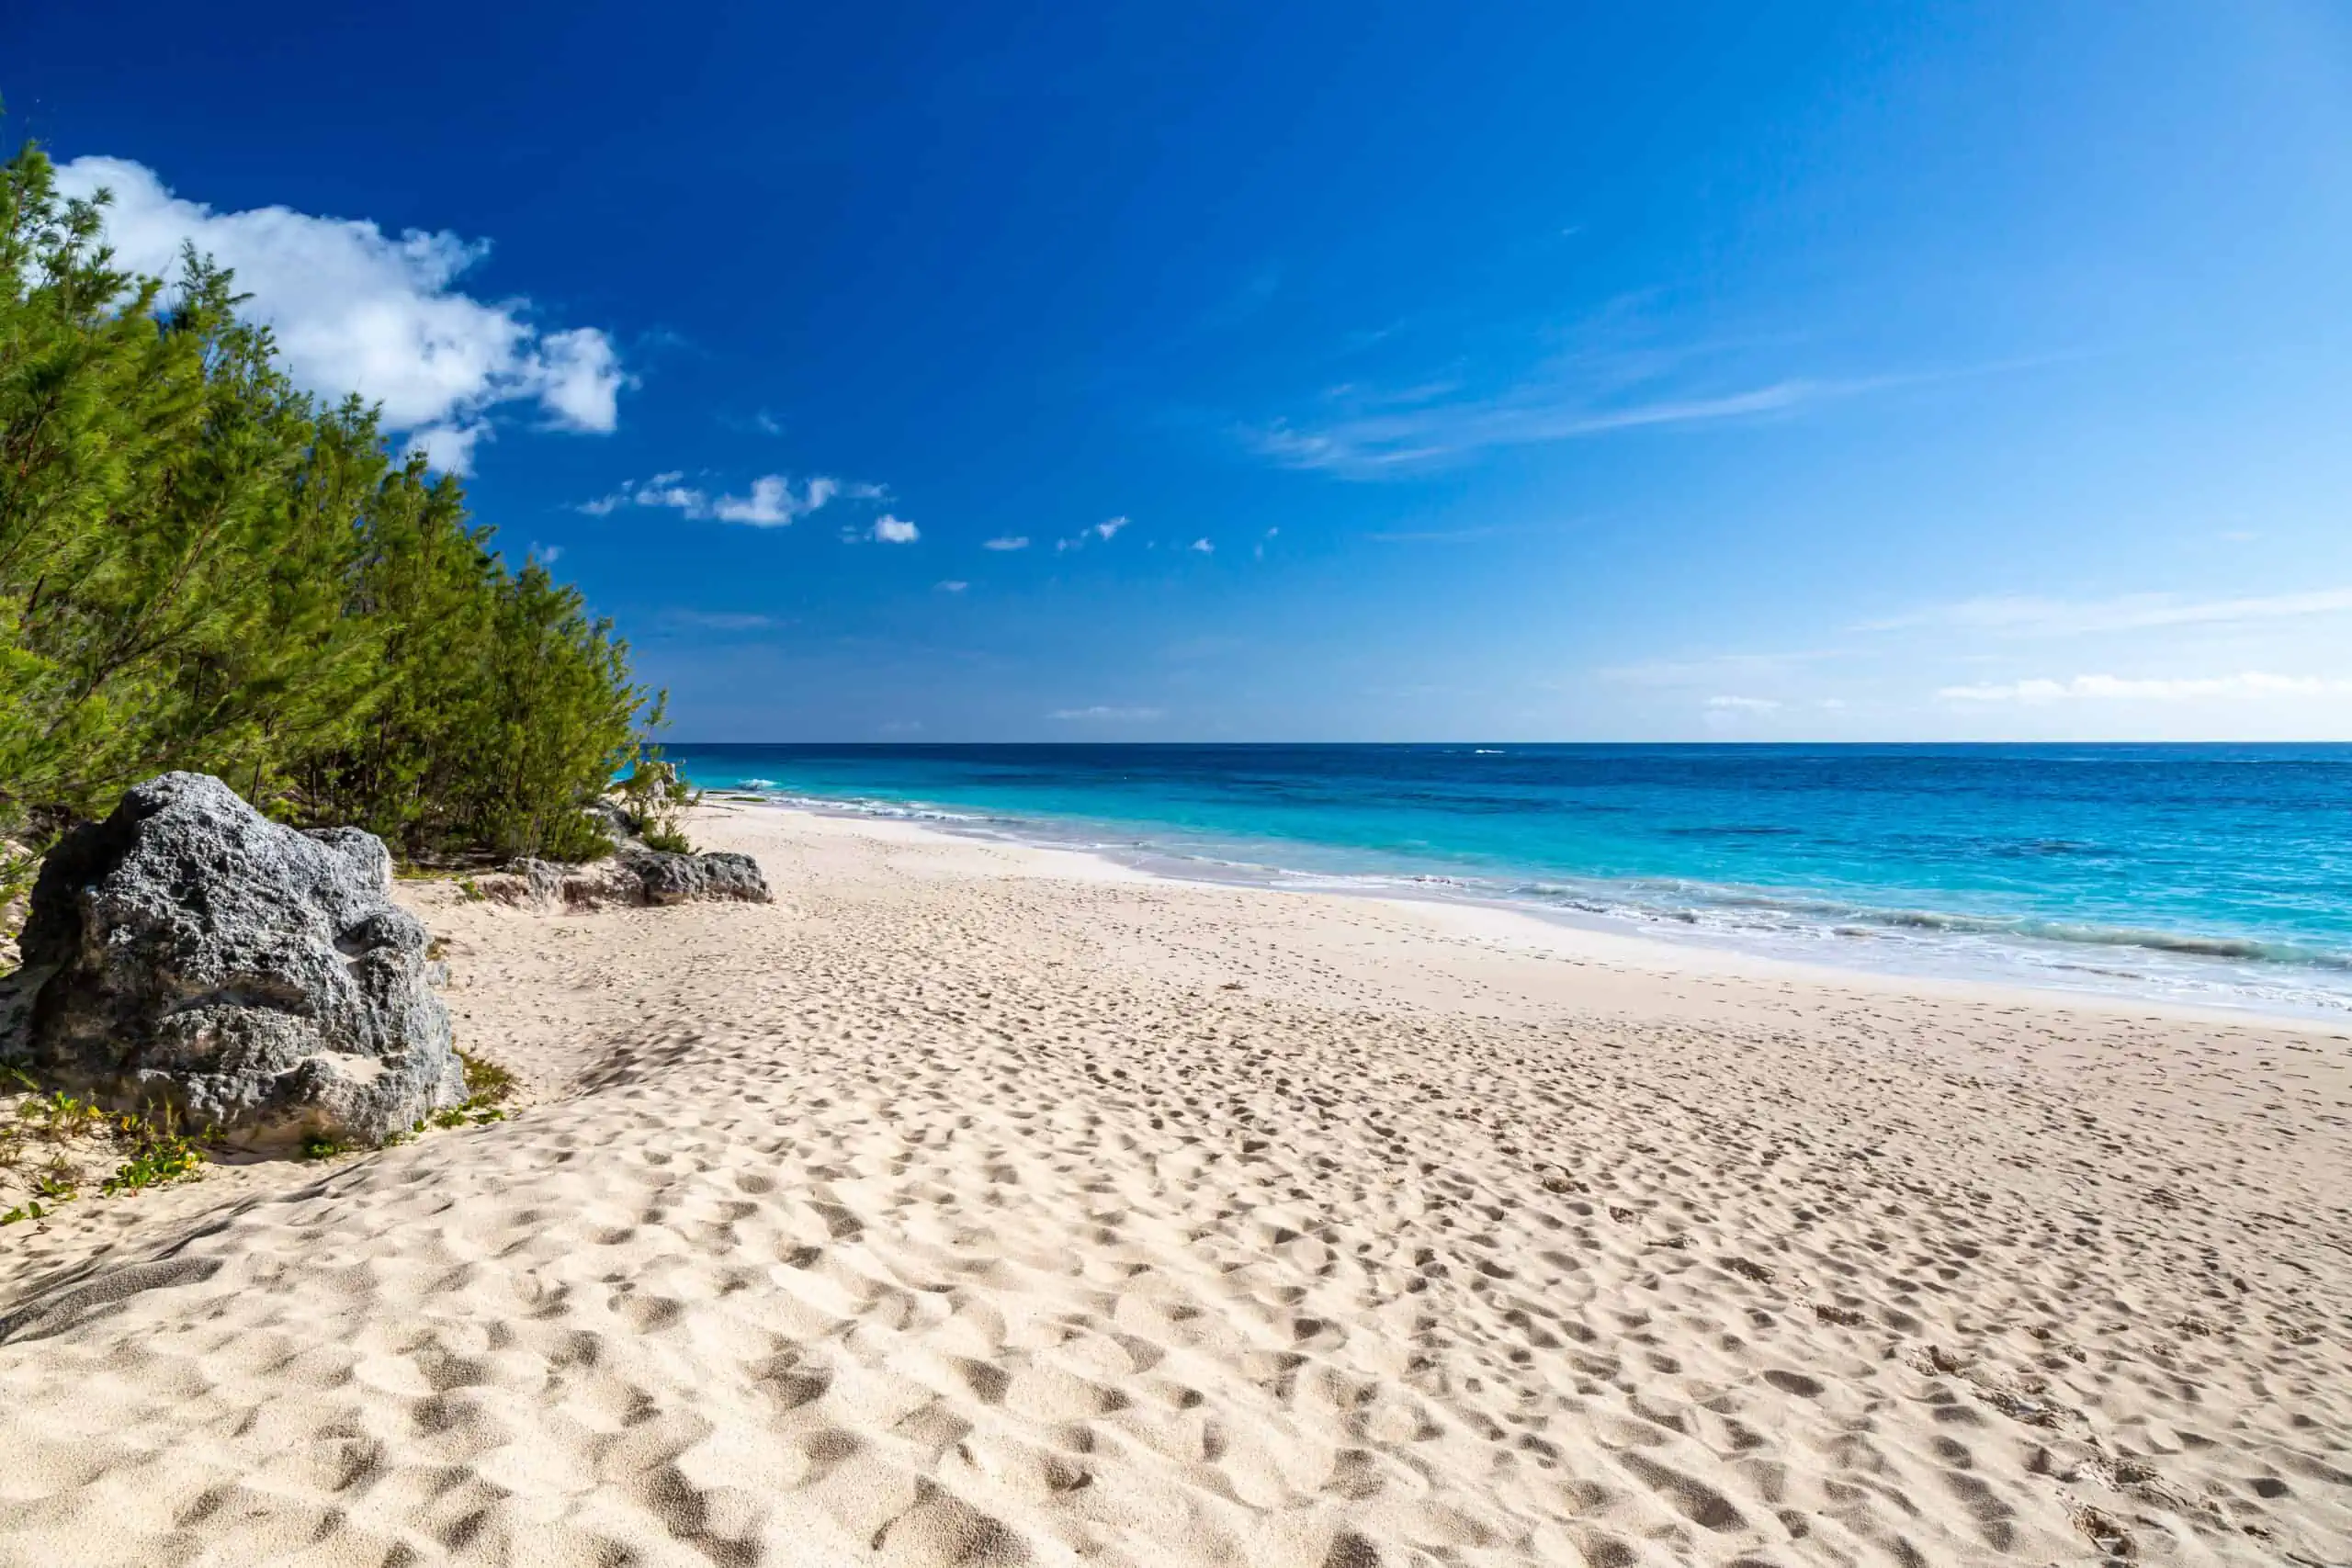 Bermy Bound? Here's Your Pink Sand Beach Guide For Bermuda - The